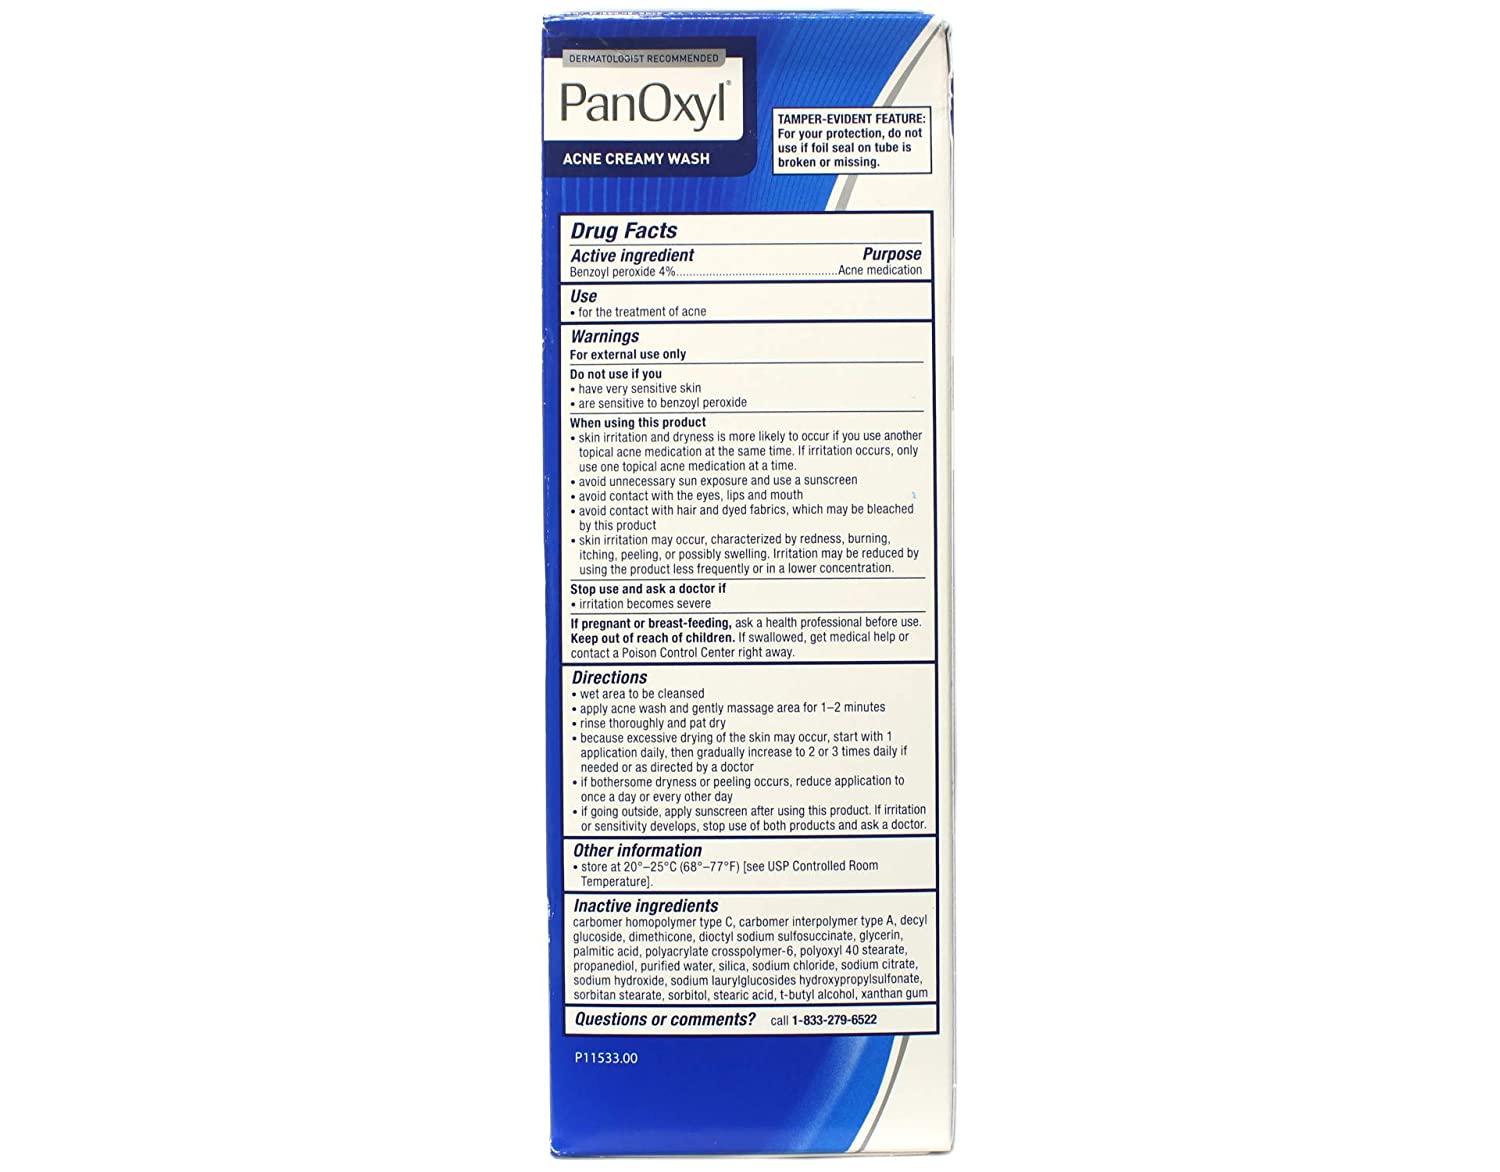 Panoxyl - Acne Creamy Wash 4 Percent Benzoyl Peroxide Daily Control, 6 Ounce